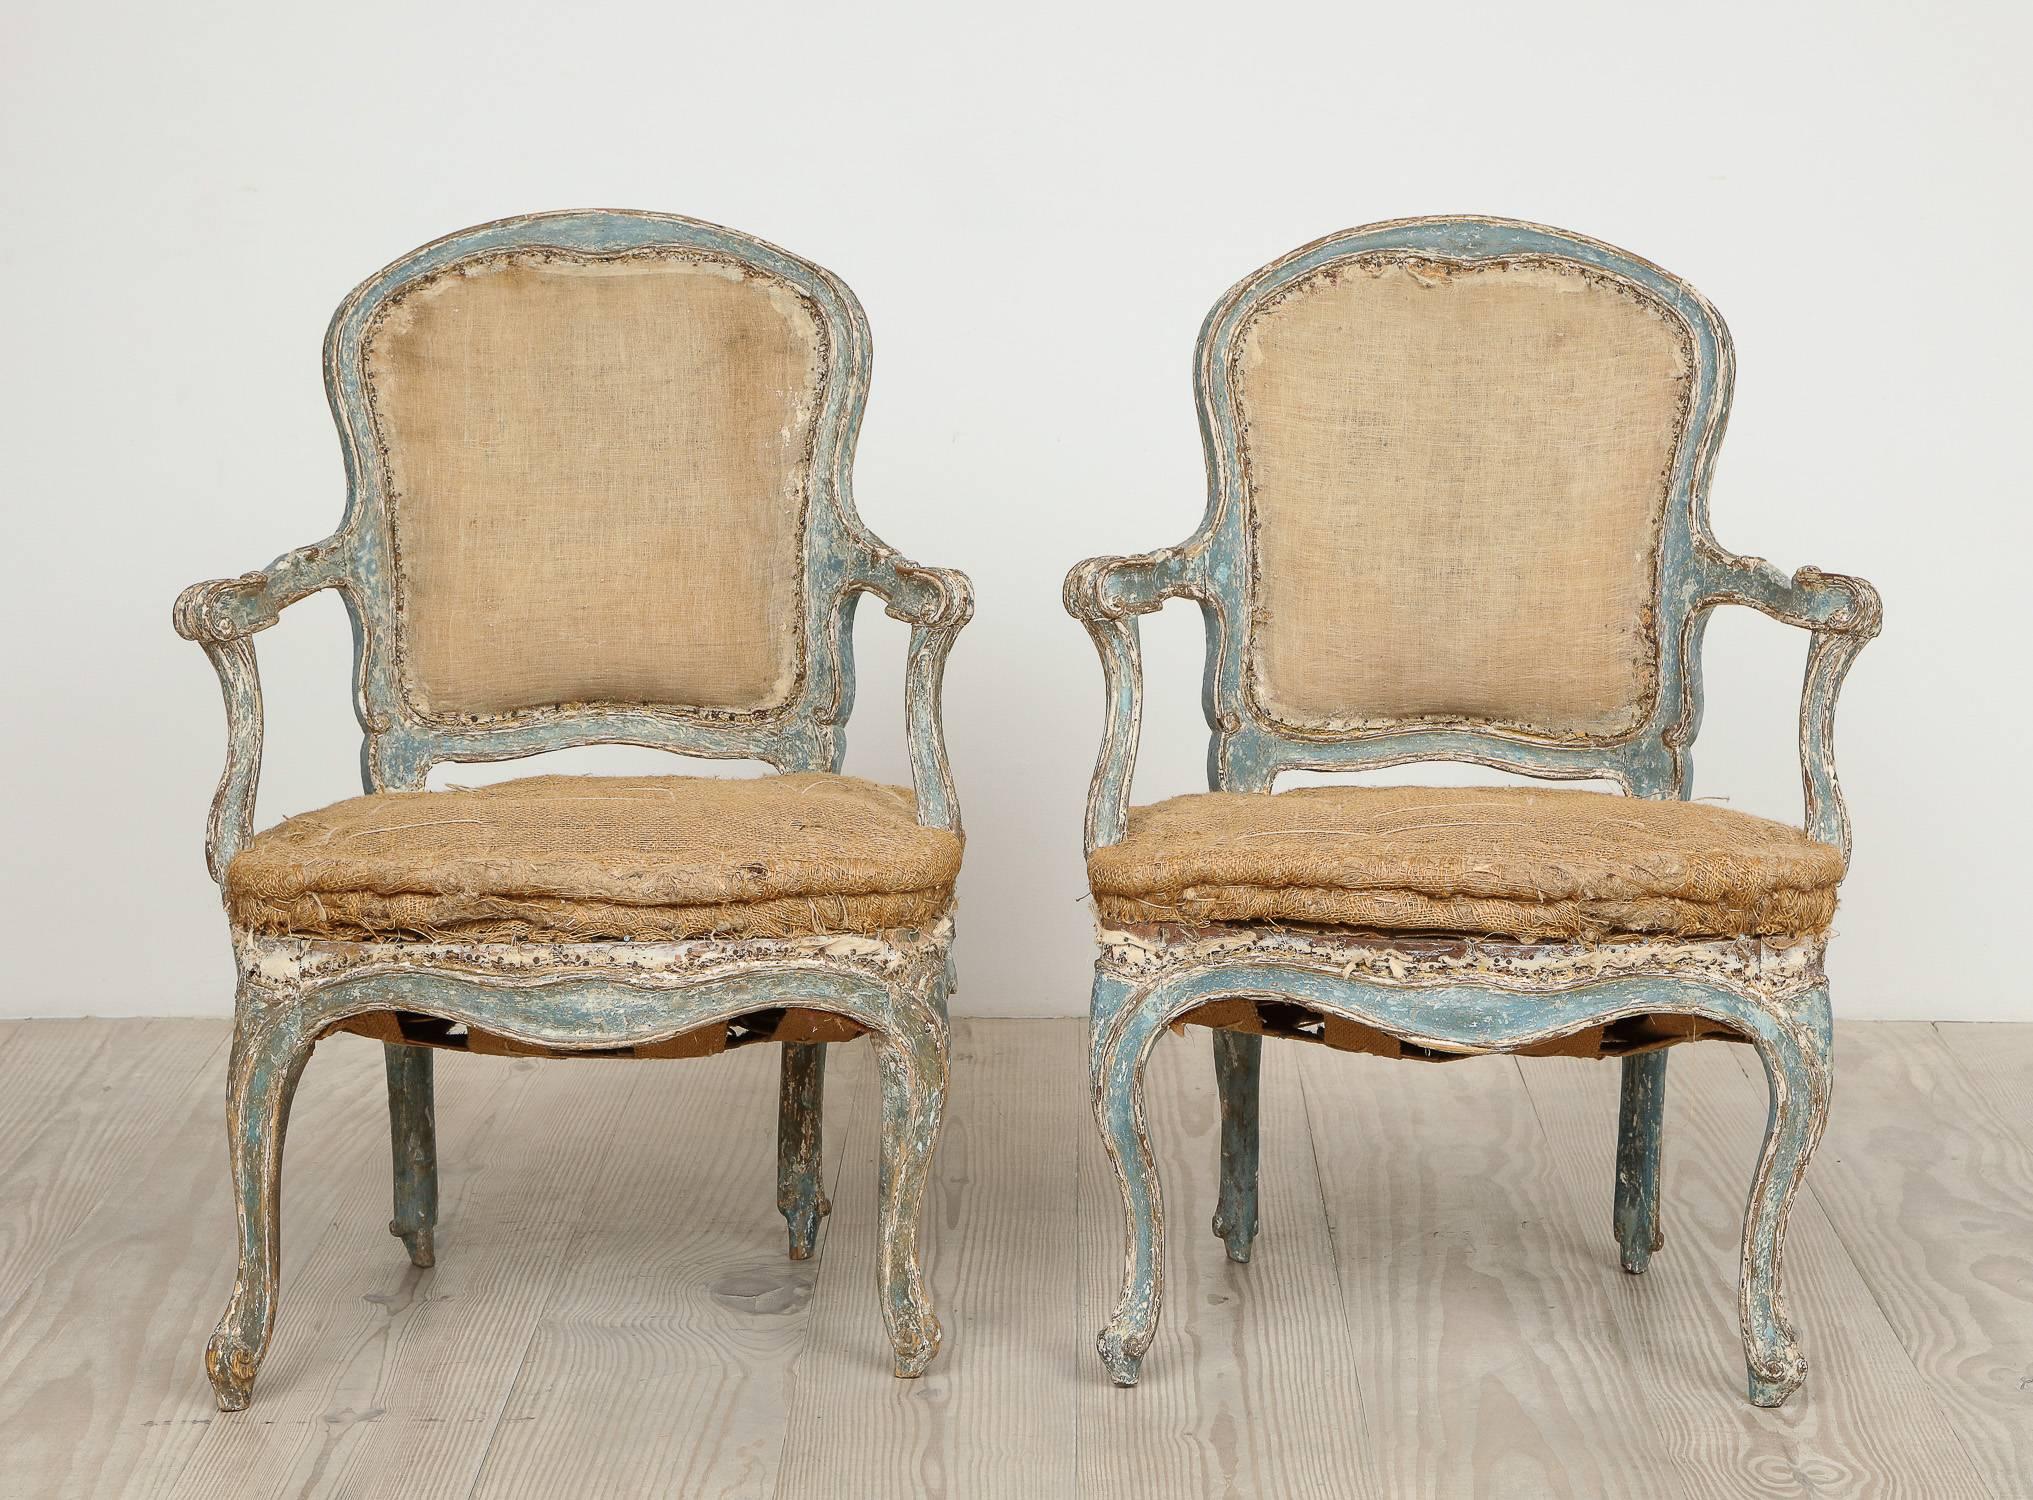 18th century rococo armchairs, pair, circa 1760 with original blue color and remnants of silver giltwood; wonderful forms with gorgeous carvings.